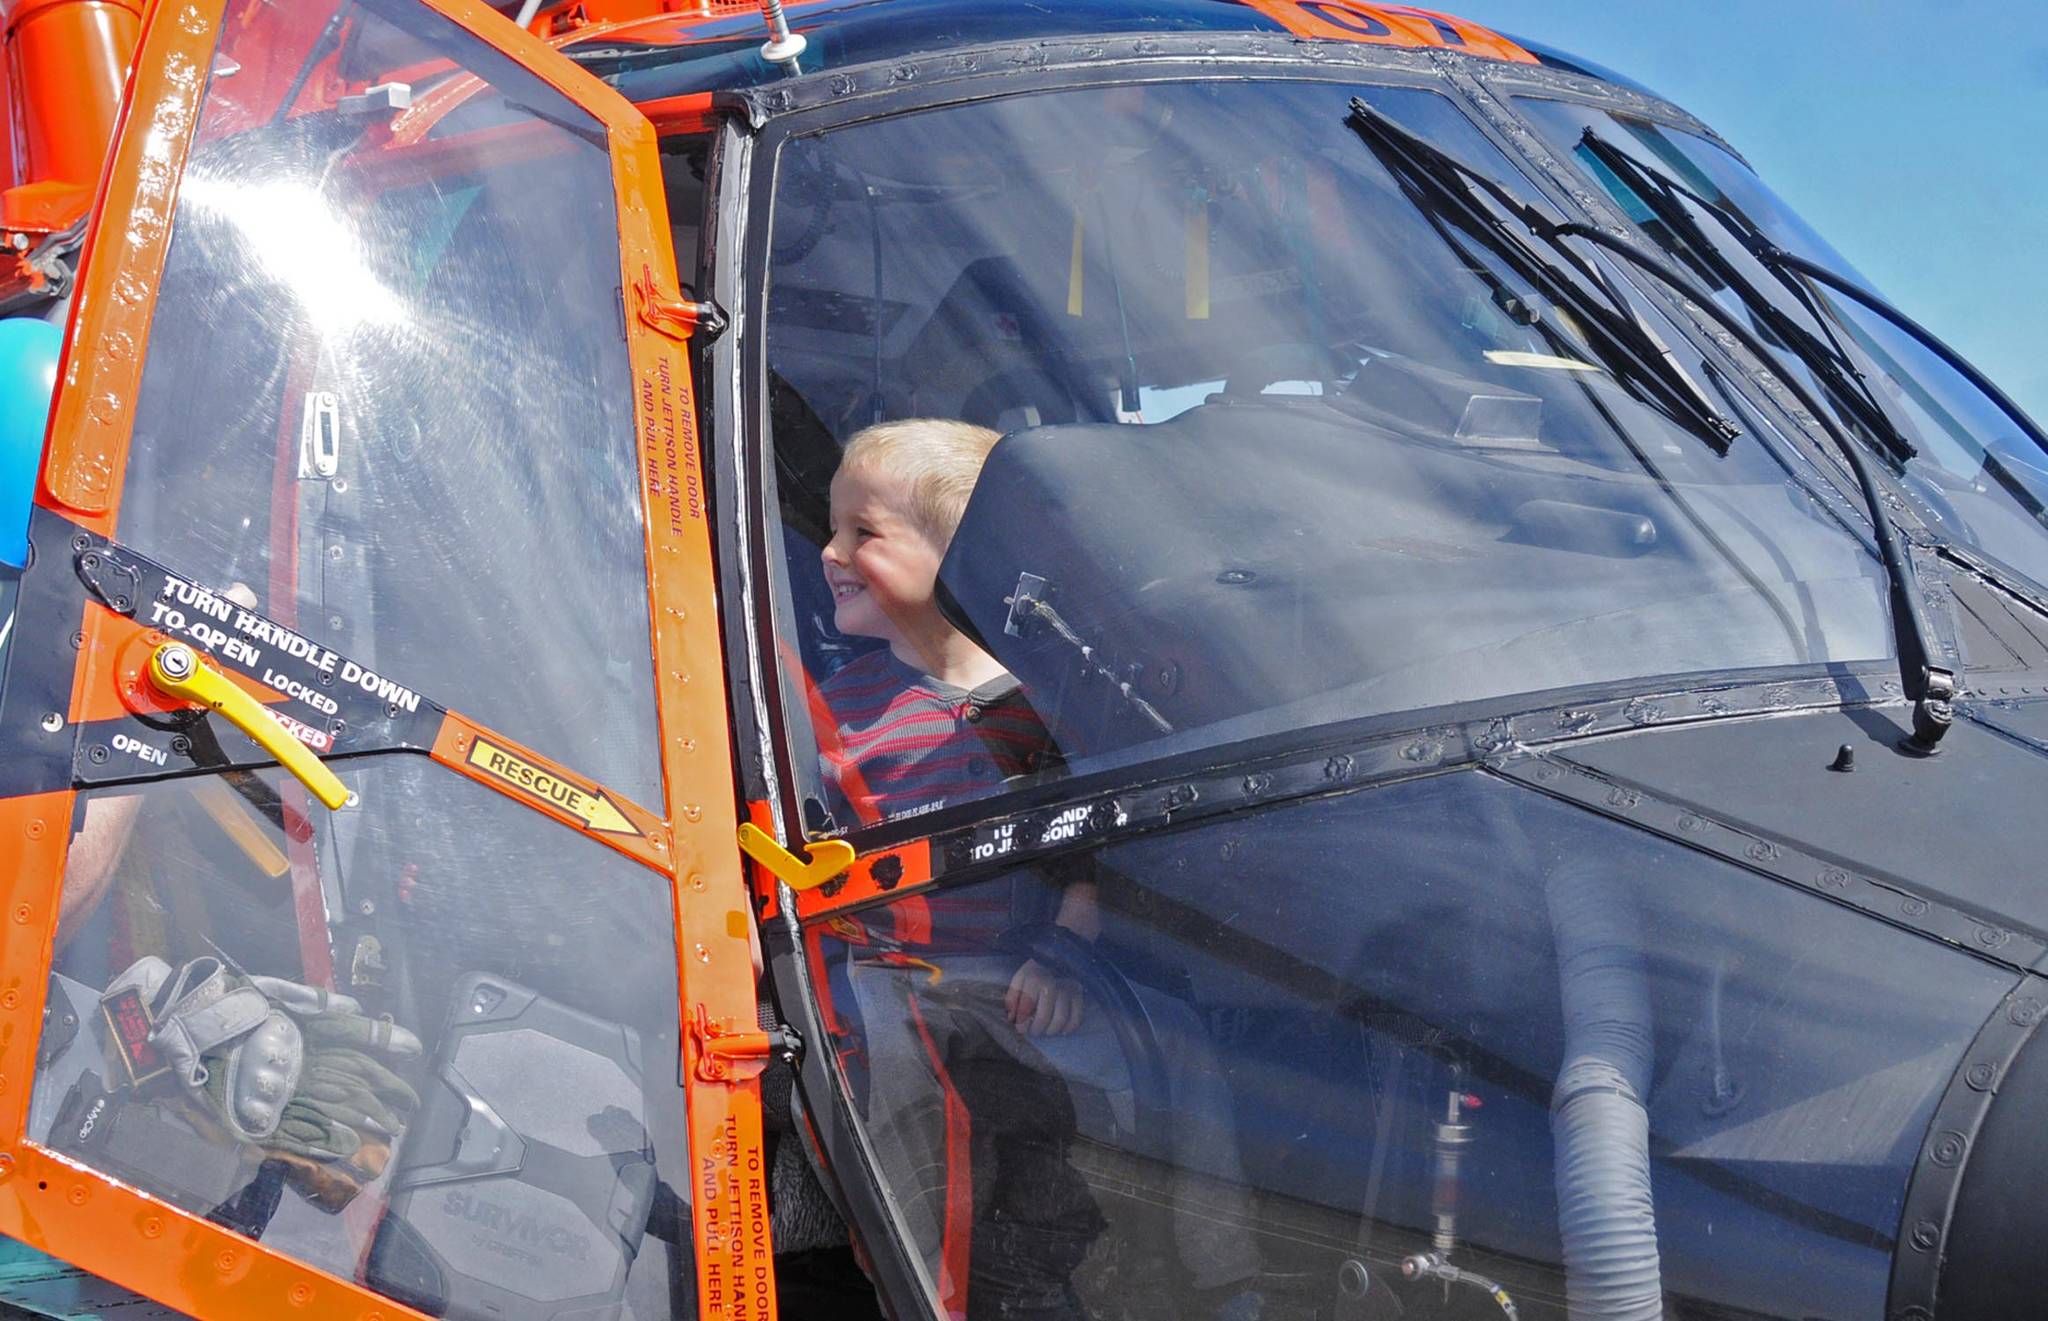 Erik Hamilton, 3 1/2, enjoys the view from the cockpit of a U.S. Coast Guard helicopter at the Kenai Municipal Airport’s annual Air Fair on Saturday, June 9, 2018 in Kenai, Alaska. The Air Fair opens up the tarmac to the public to come and get a closer look at a wide variety of aircraft, including small civilian planes, a commercial plane owned by Hilcorp and larger military planes. (Photo by Elizabeth Earl/Peninsula Clarion)